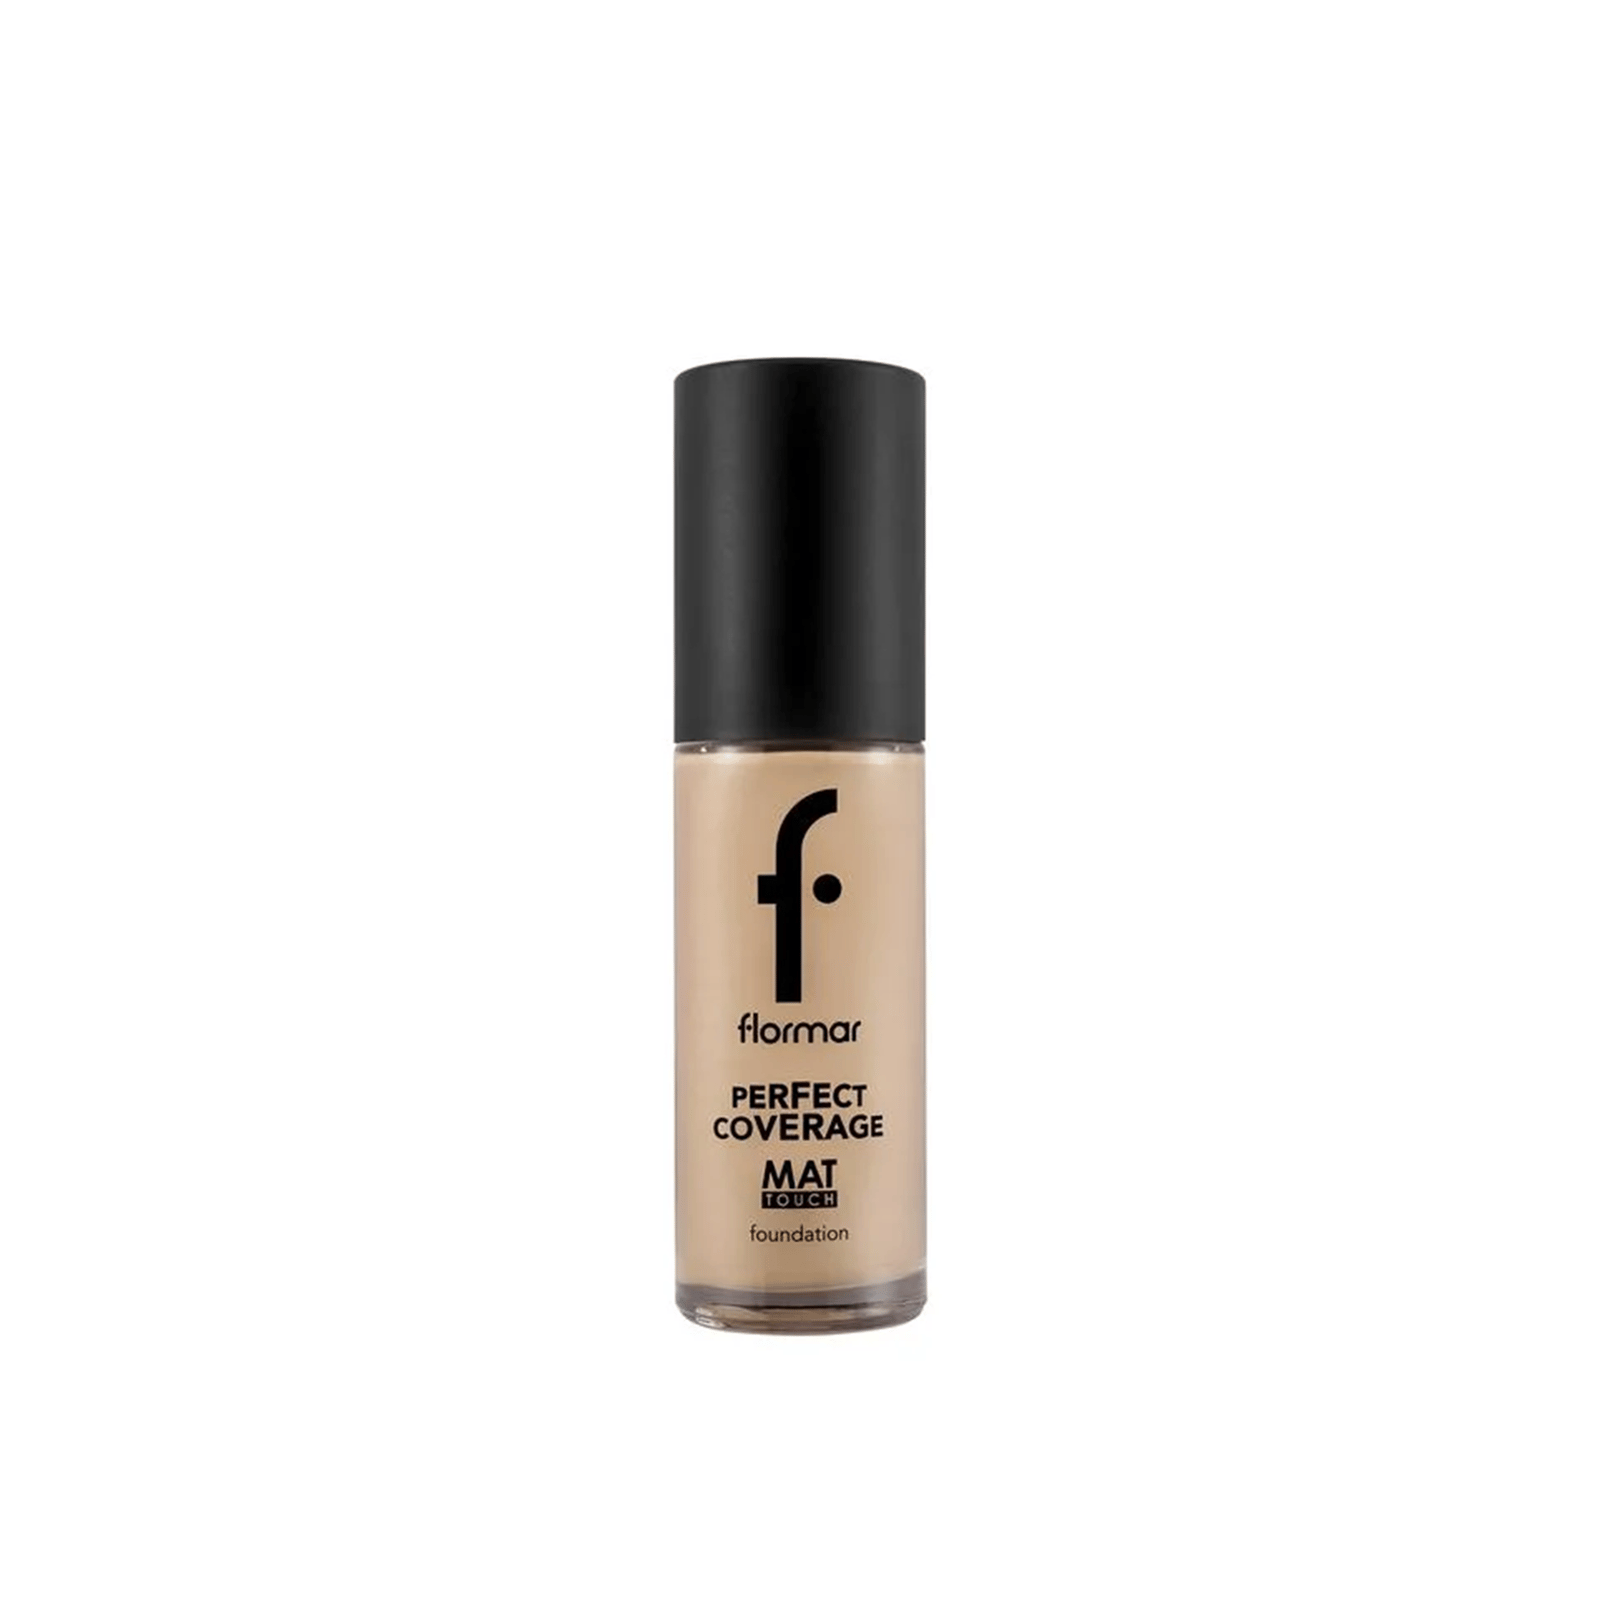 Flormar Perfect Coverage Mat Touch Foundation 321 Natural Pastelle 30ml